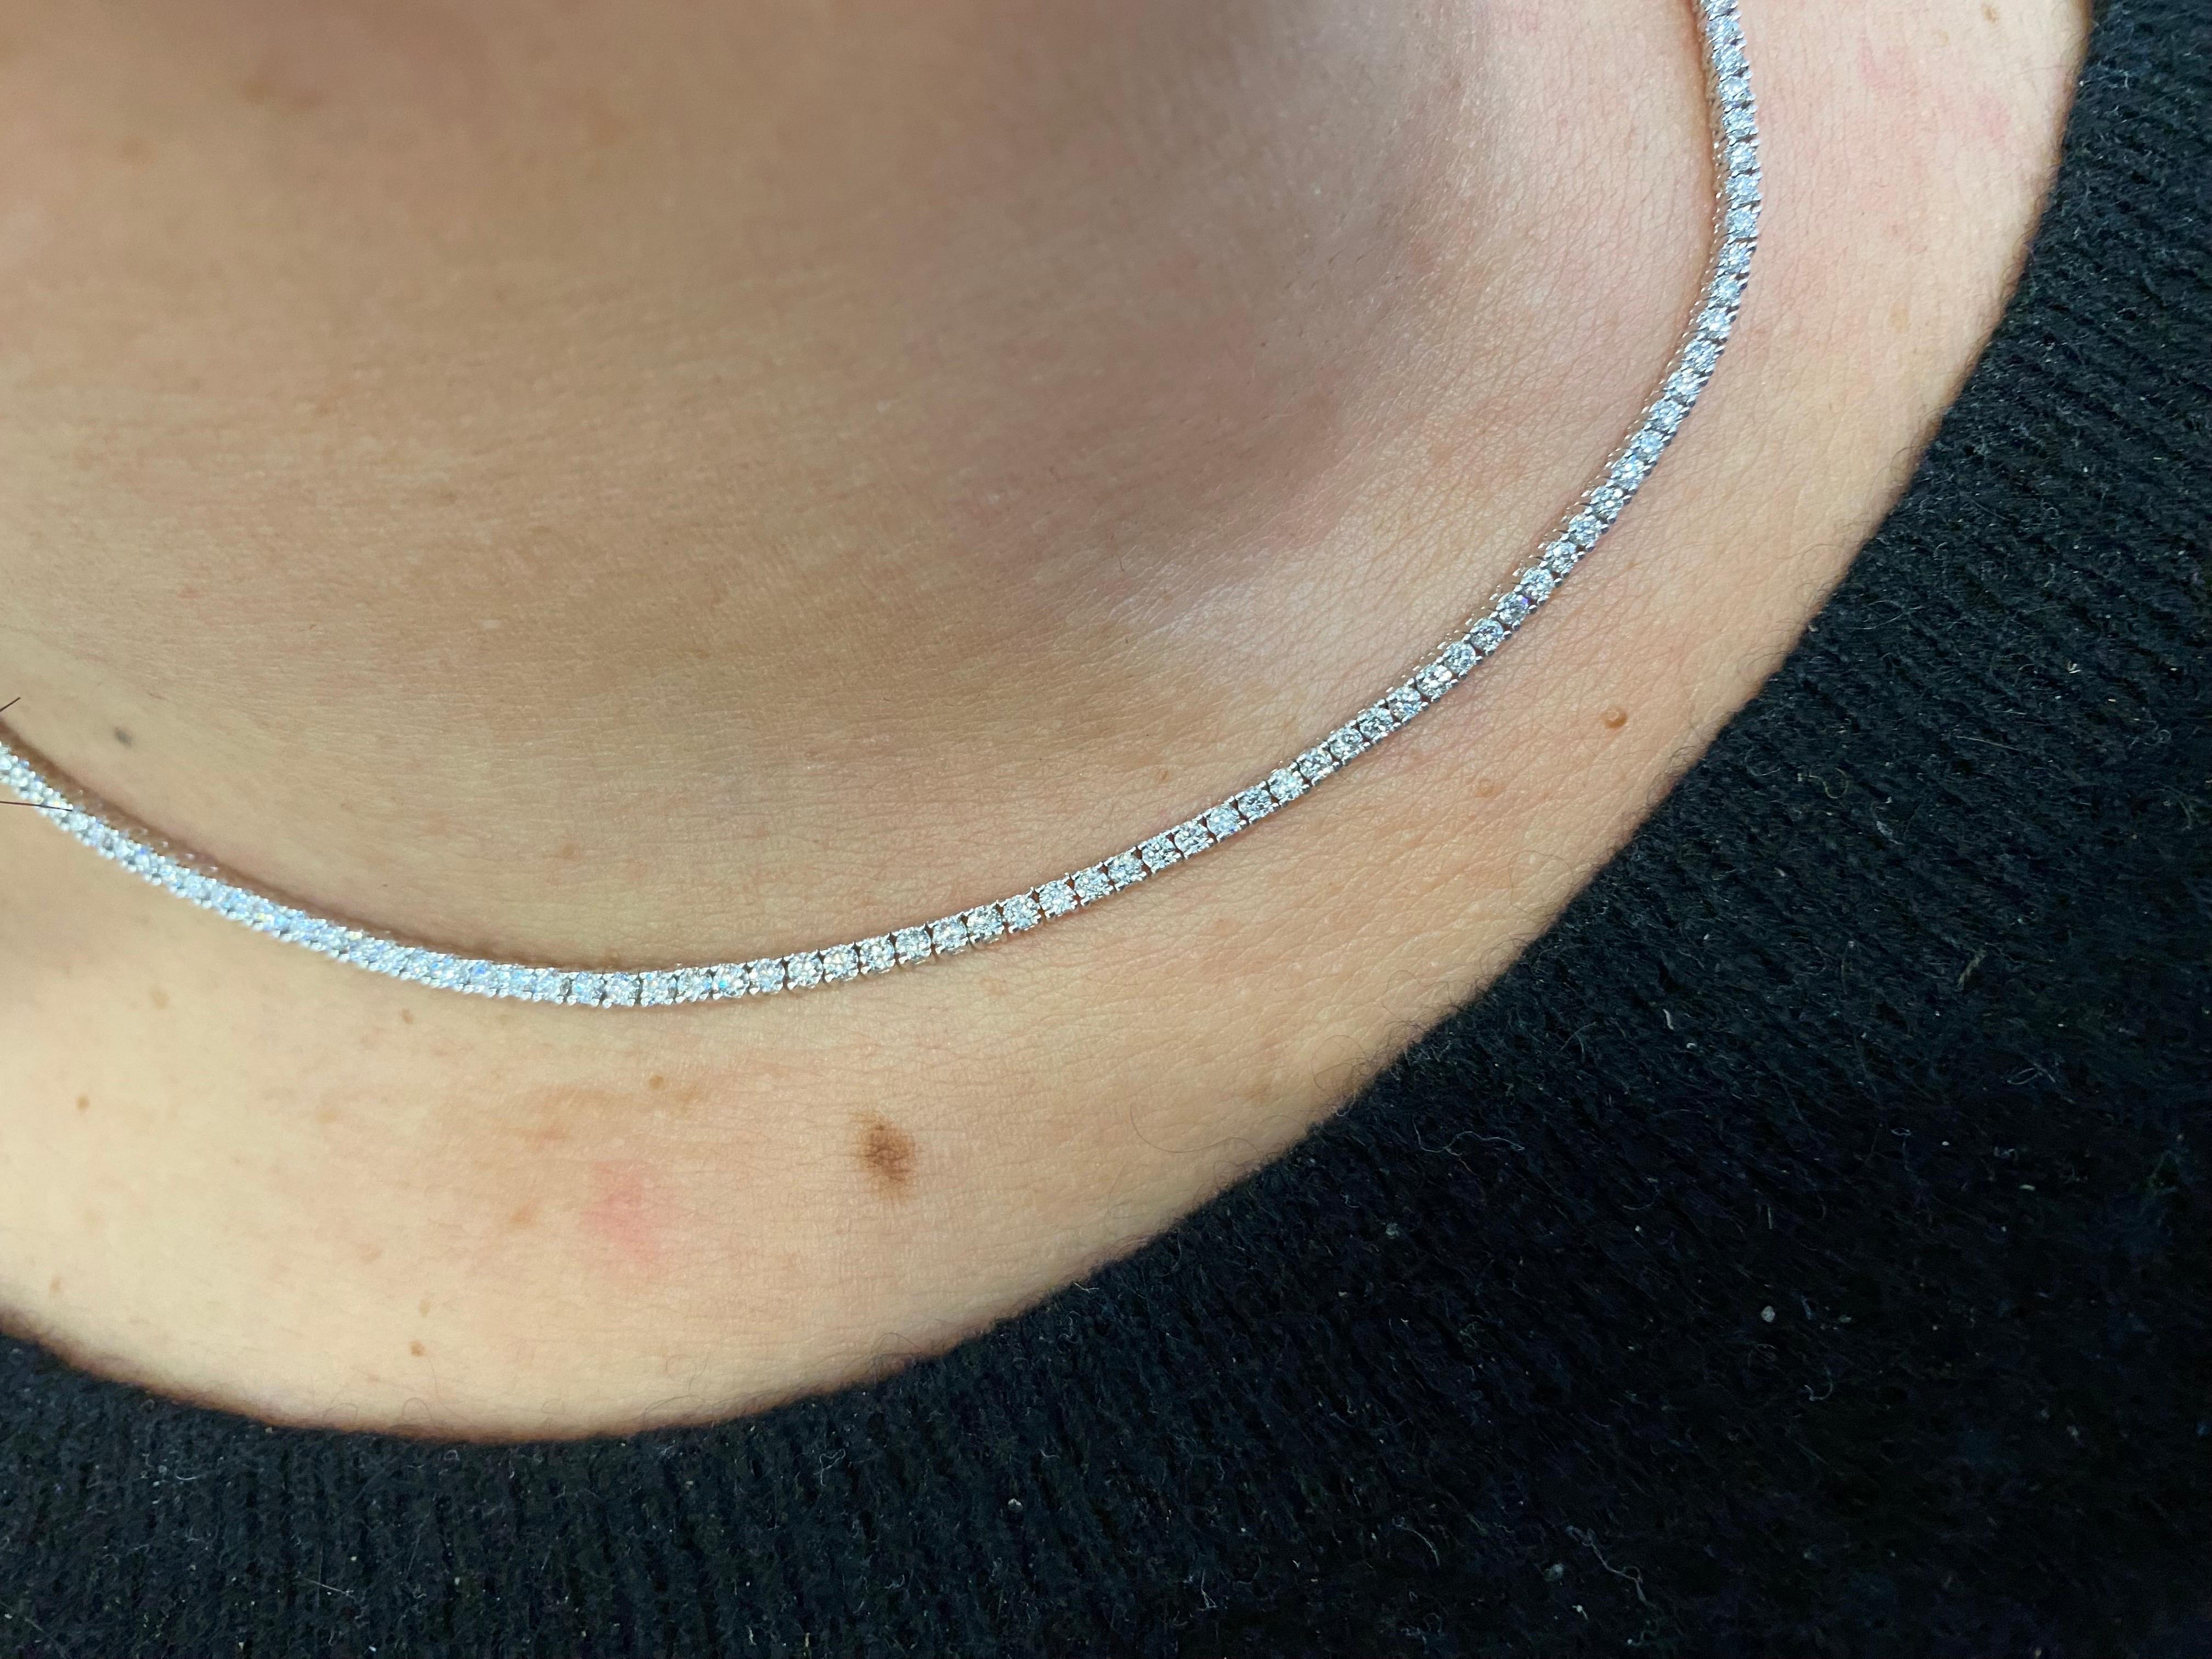 Diamond tennis necklace 16 inch set in 14K white gold. Each stone weighs 0.025 carats, and the total diamond weight is 4.81 carats. The color of the stones are G, the clarity is SI1-SI2.